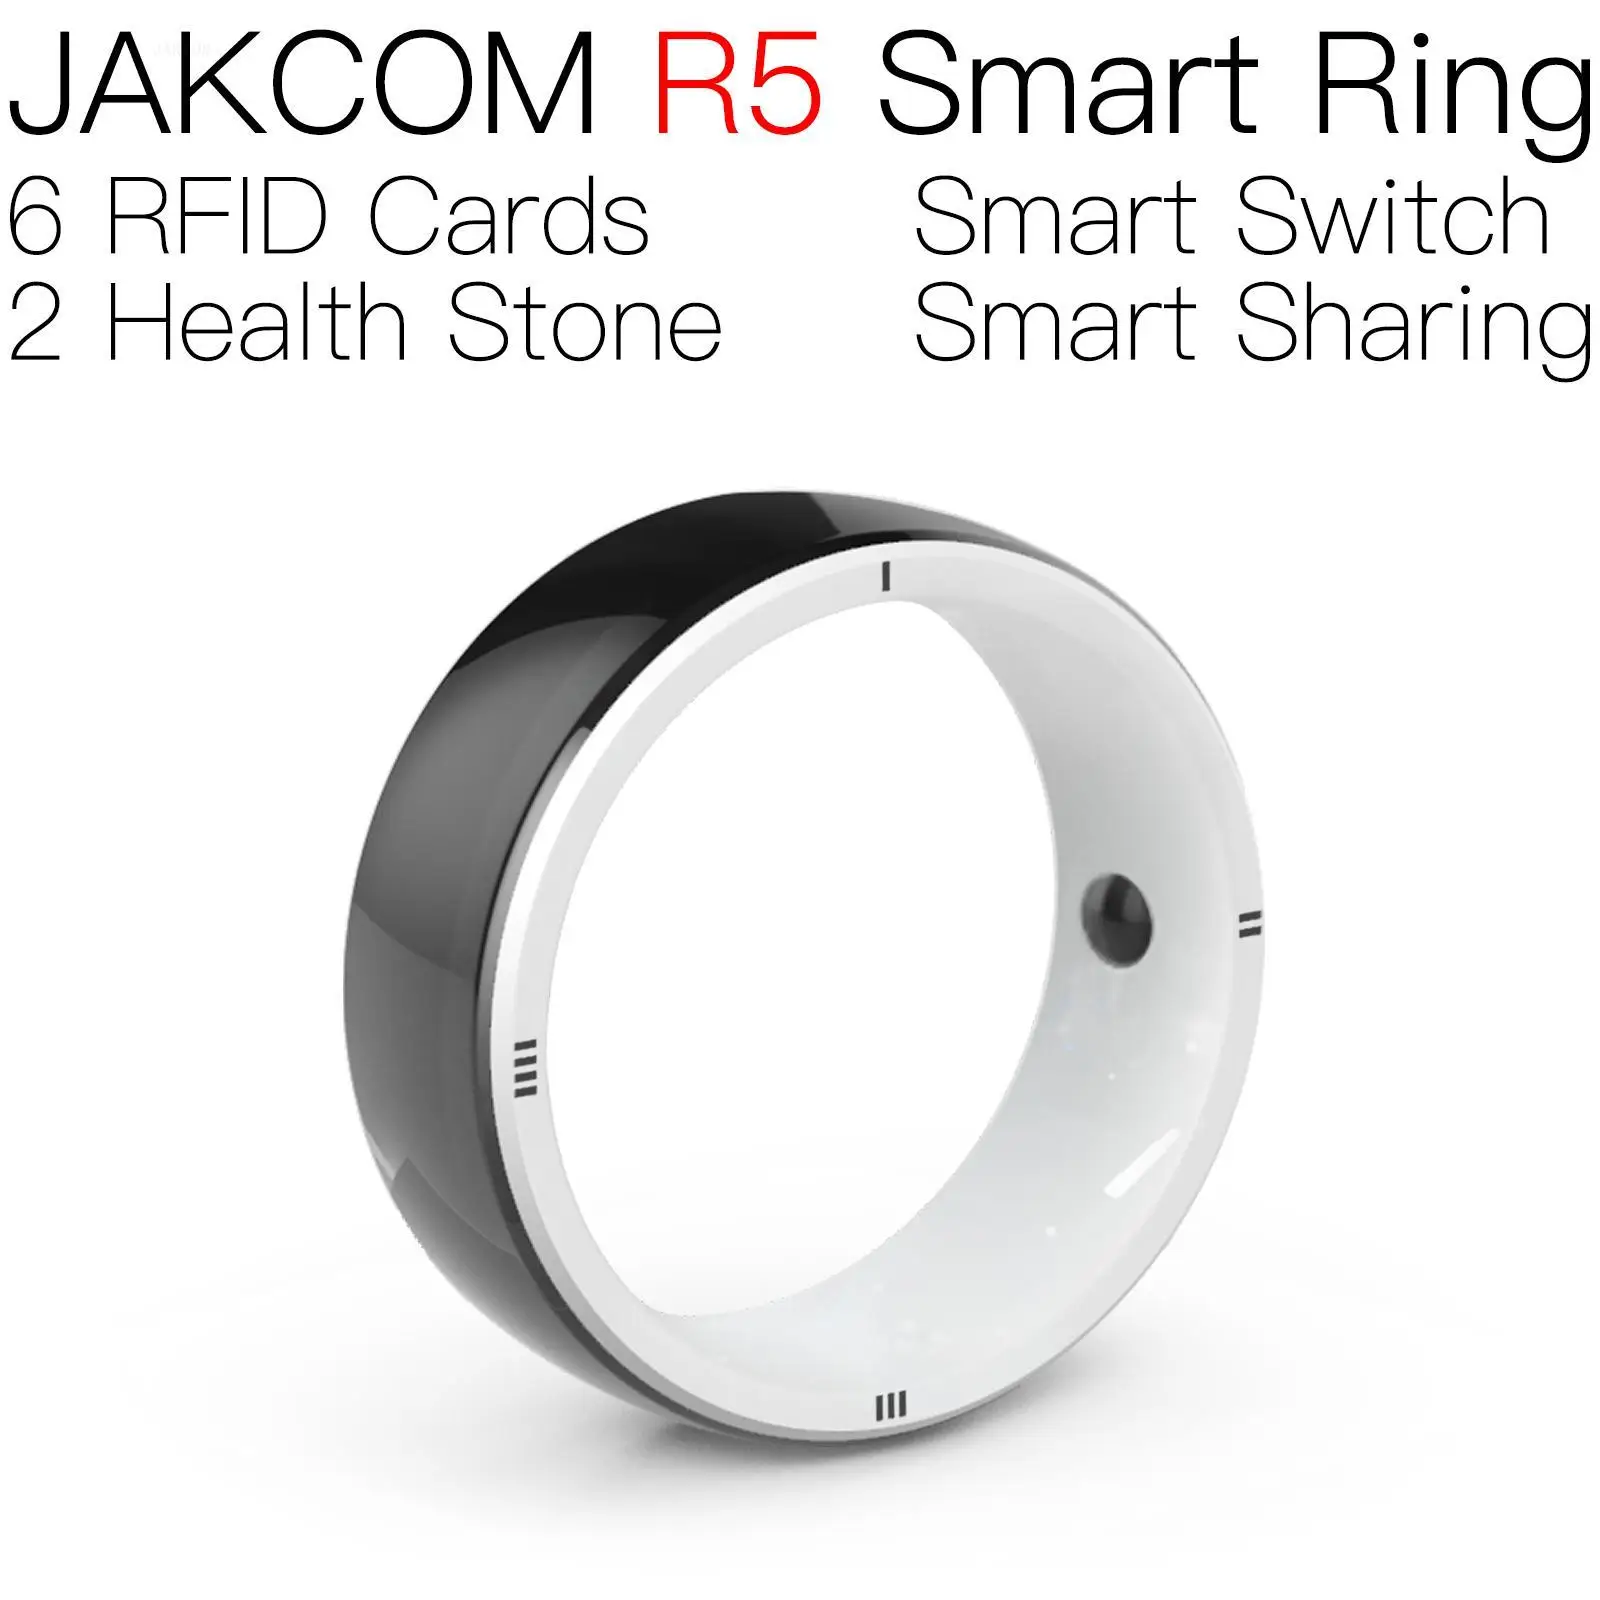 

JAKCOM R5 Smart Ring better than aninal crossing switch rfid 4k nfc capacitive touch uhf tag free shipping universal sticer pay